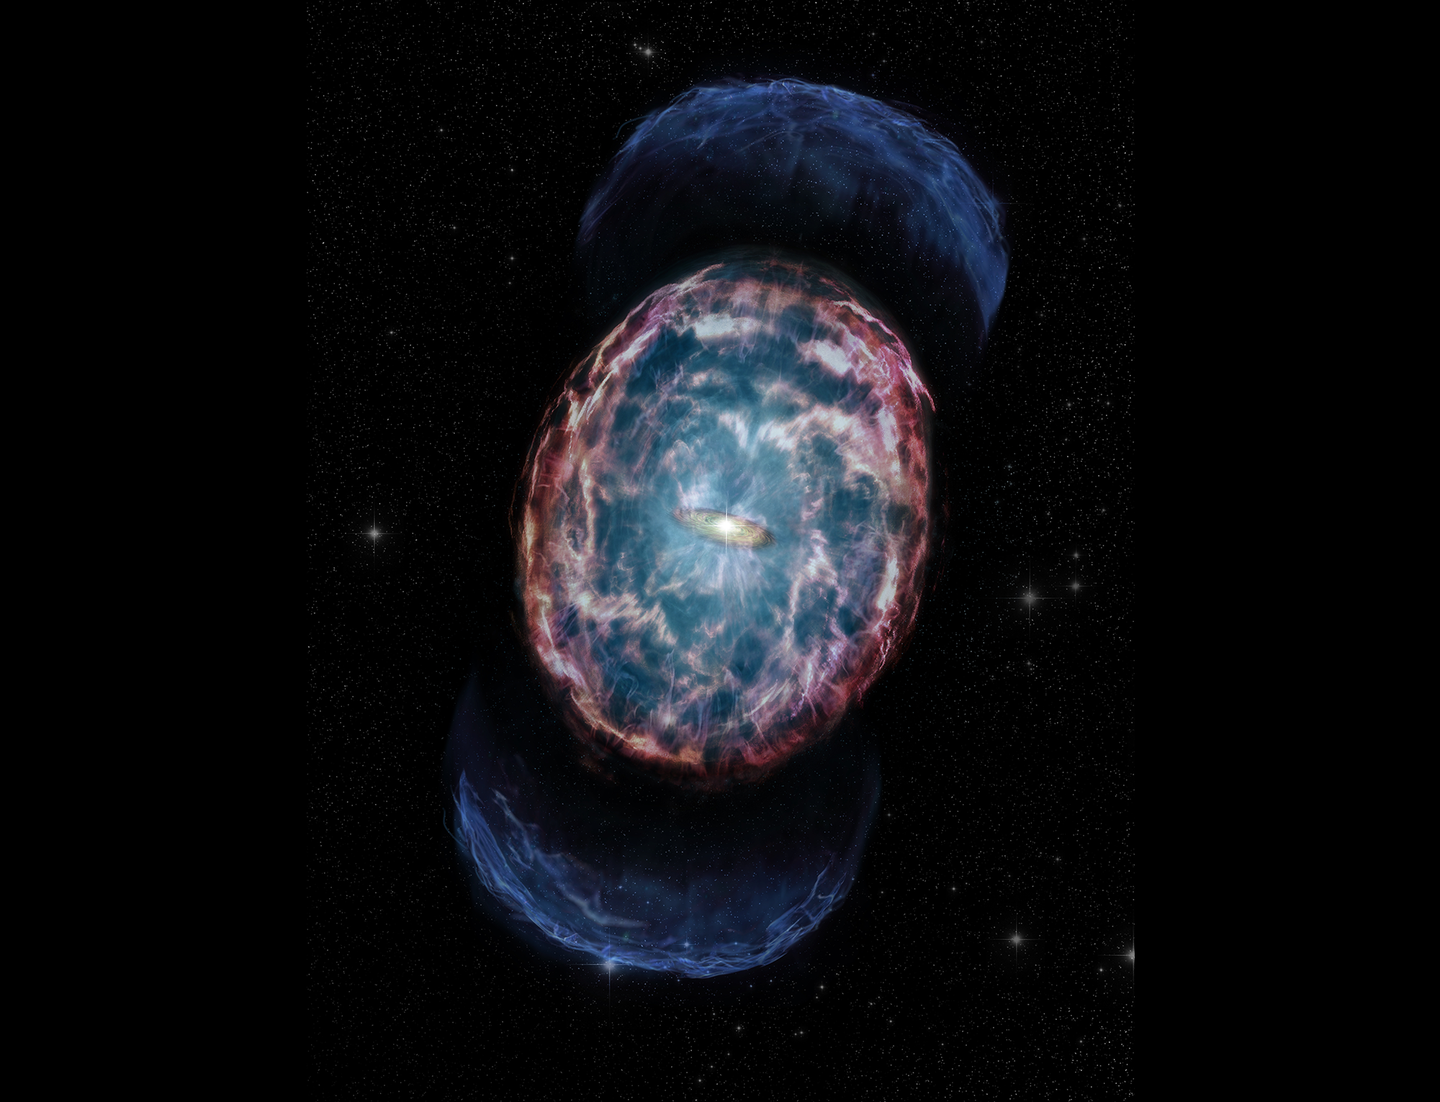 a kilonova, a cosmic event between two neutron stars showing the collision in the middle and purple blue emissions coming off of it